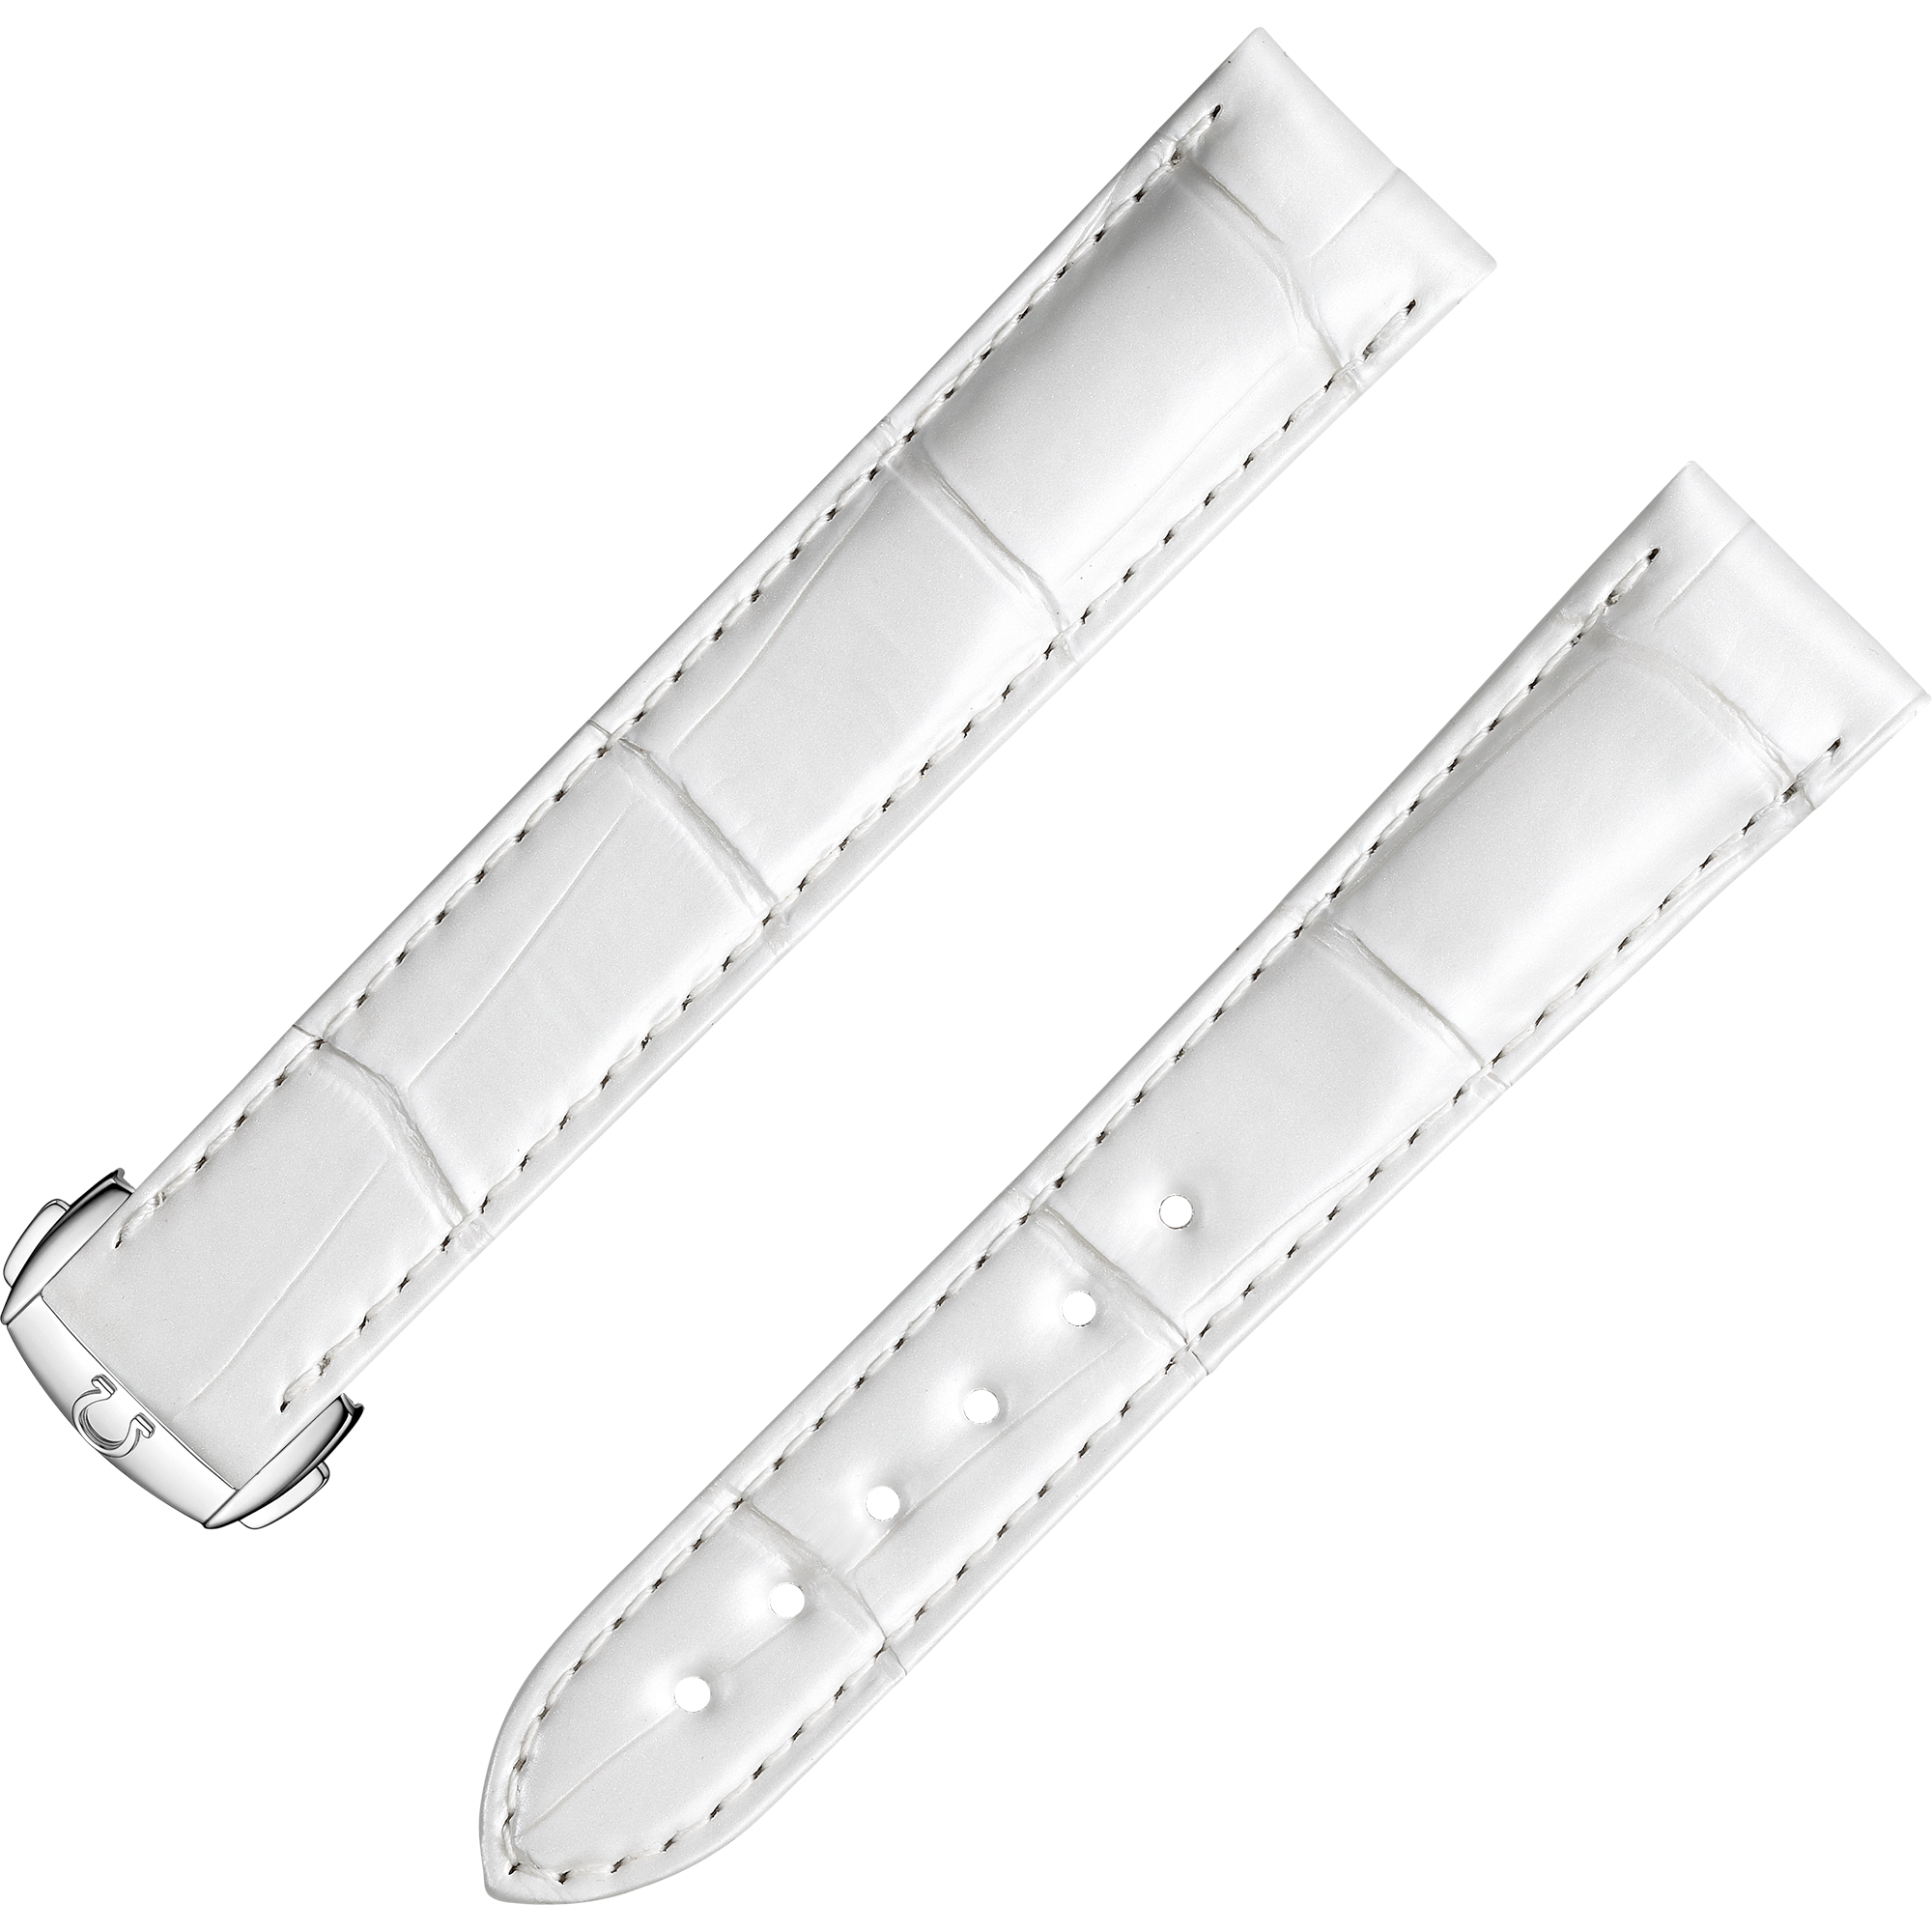 Two-piece strap - White alligator leather strap with foldover clasp - 98000346W